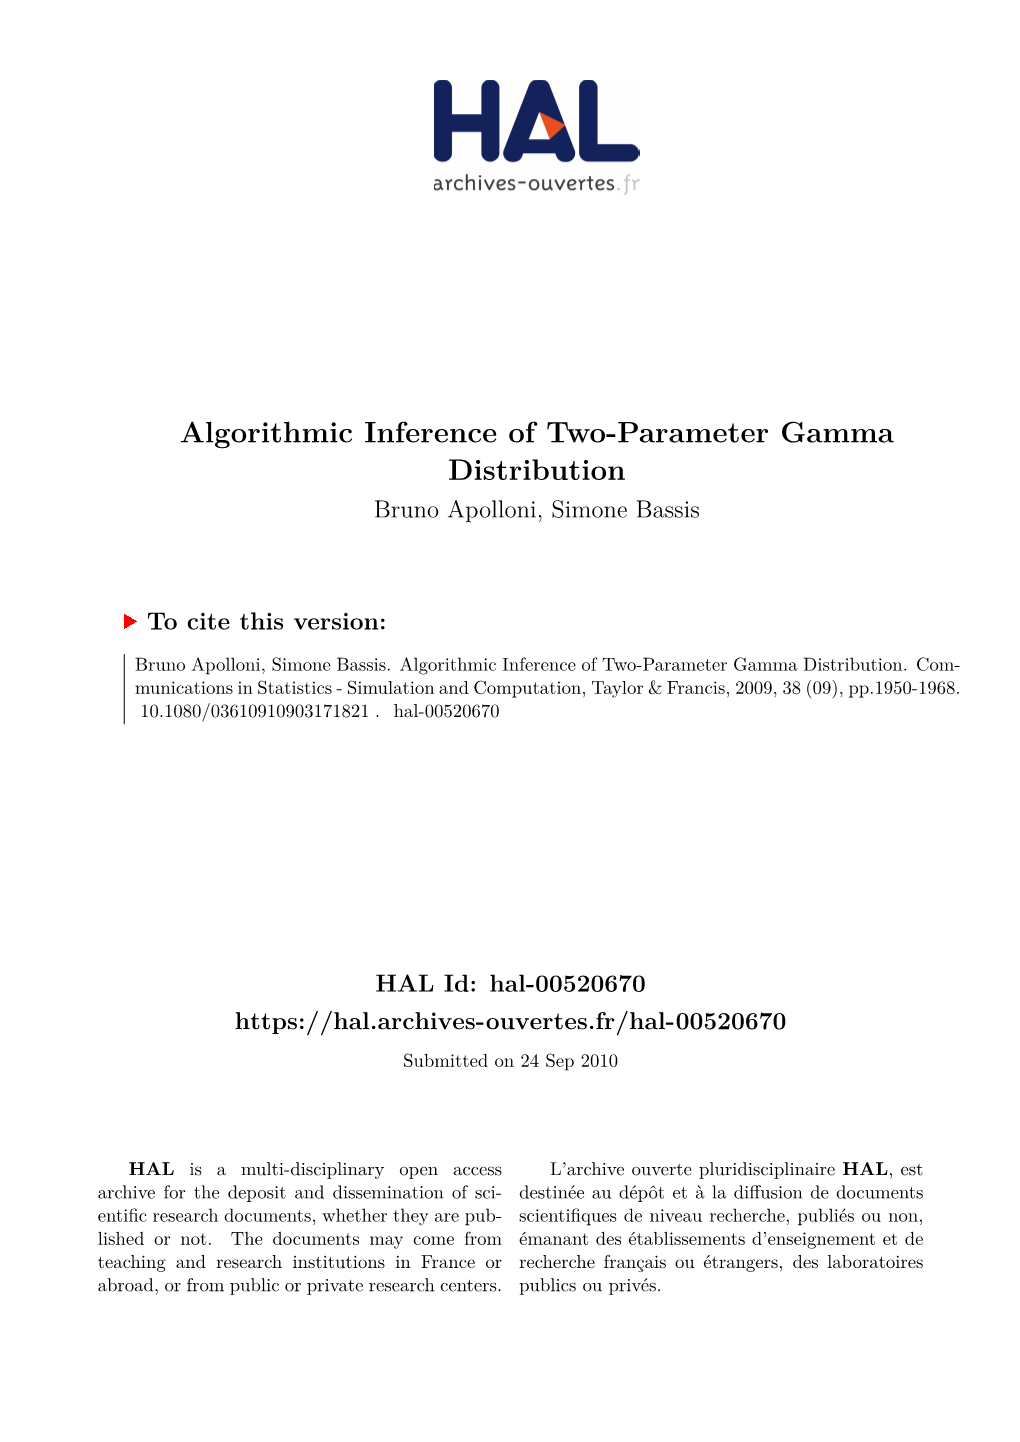 Algorithmic Inference of Two-Parameter Gamma Distribution Bruno Apolloni, Simone Bassis